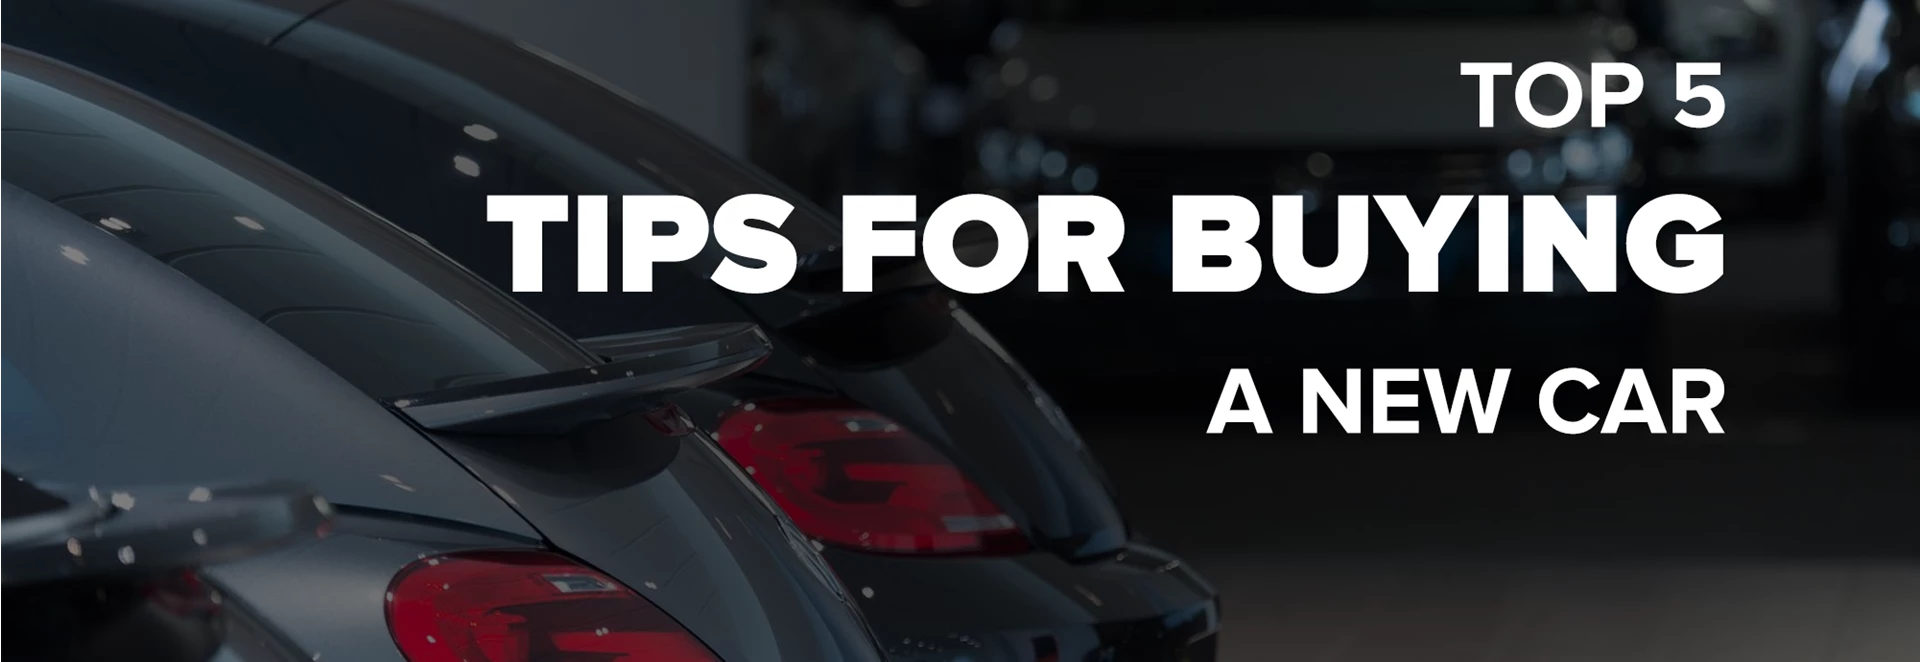 Tips for buying a new car 